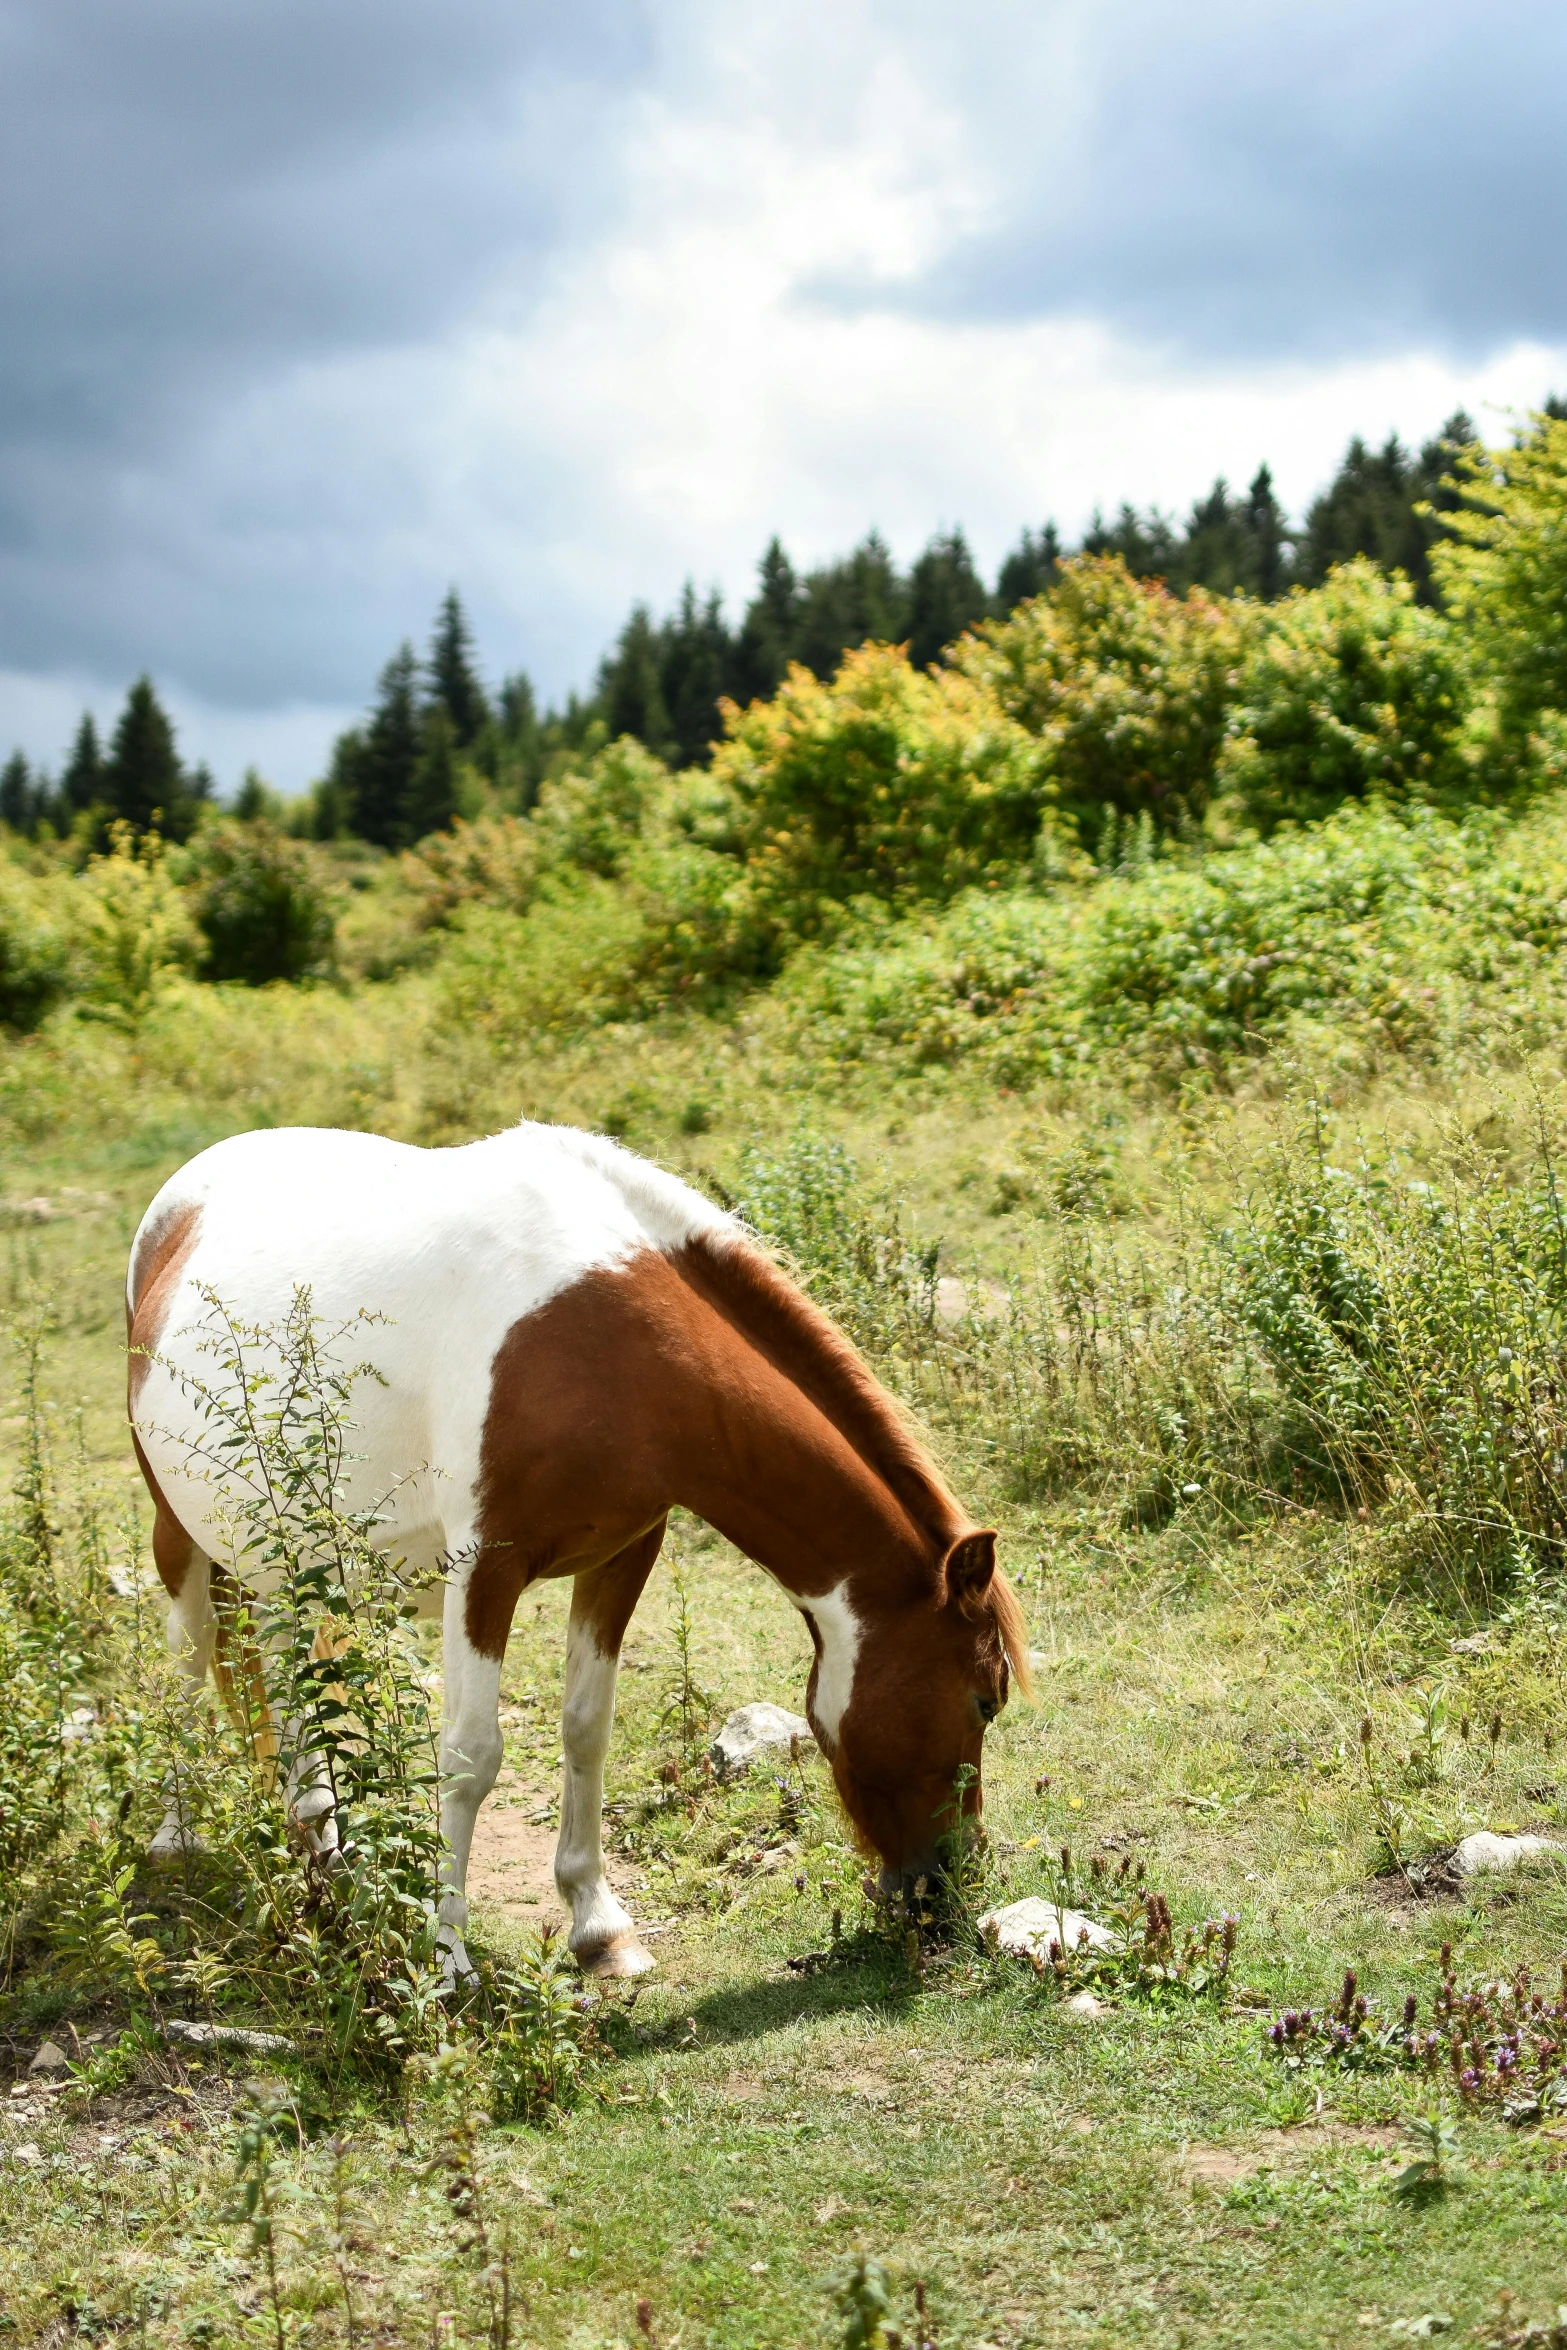 brown and white horse in grassy field eating